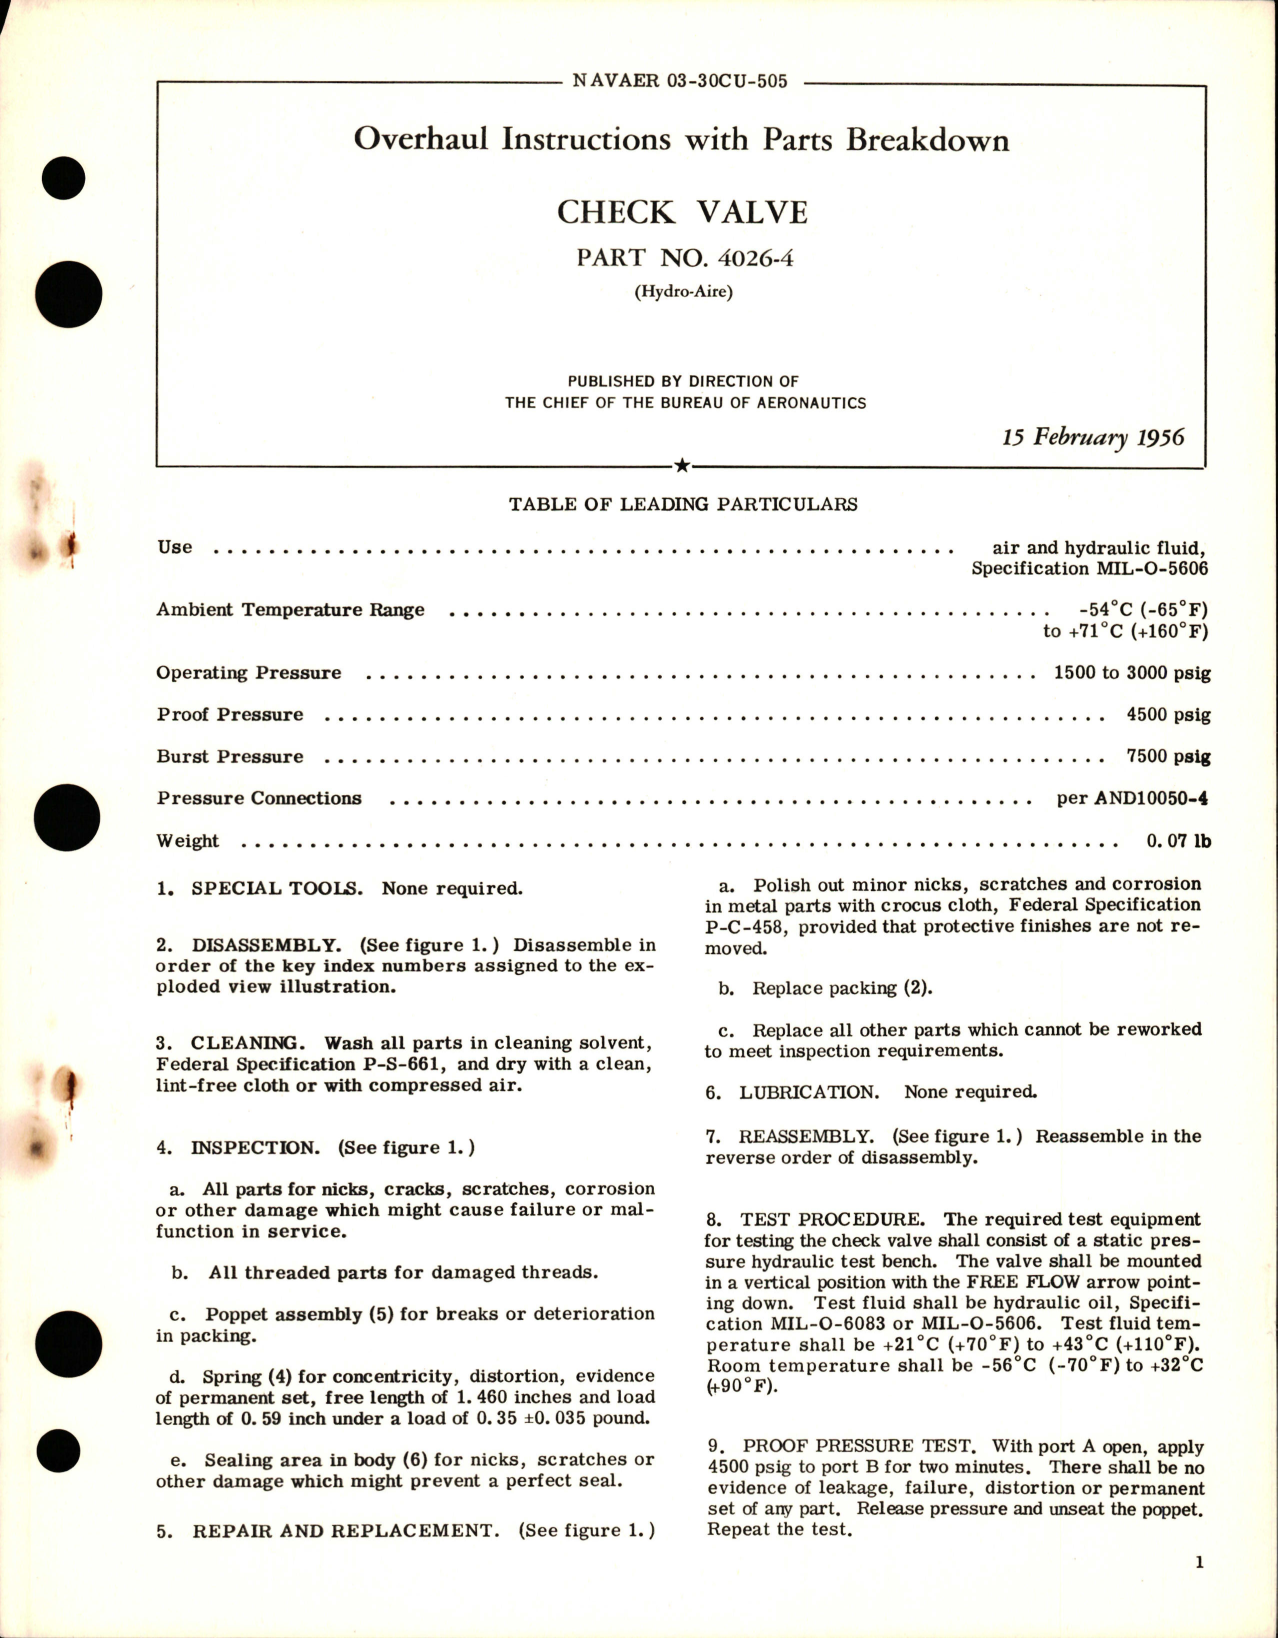 Sample page 1 from AirCorps Library document: Overhaul Instructions with Parts Breakdown for Check Valve - Part 4026-4